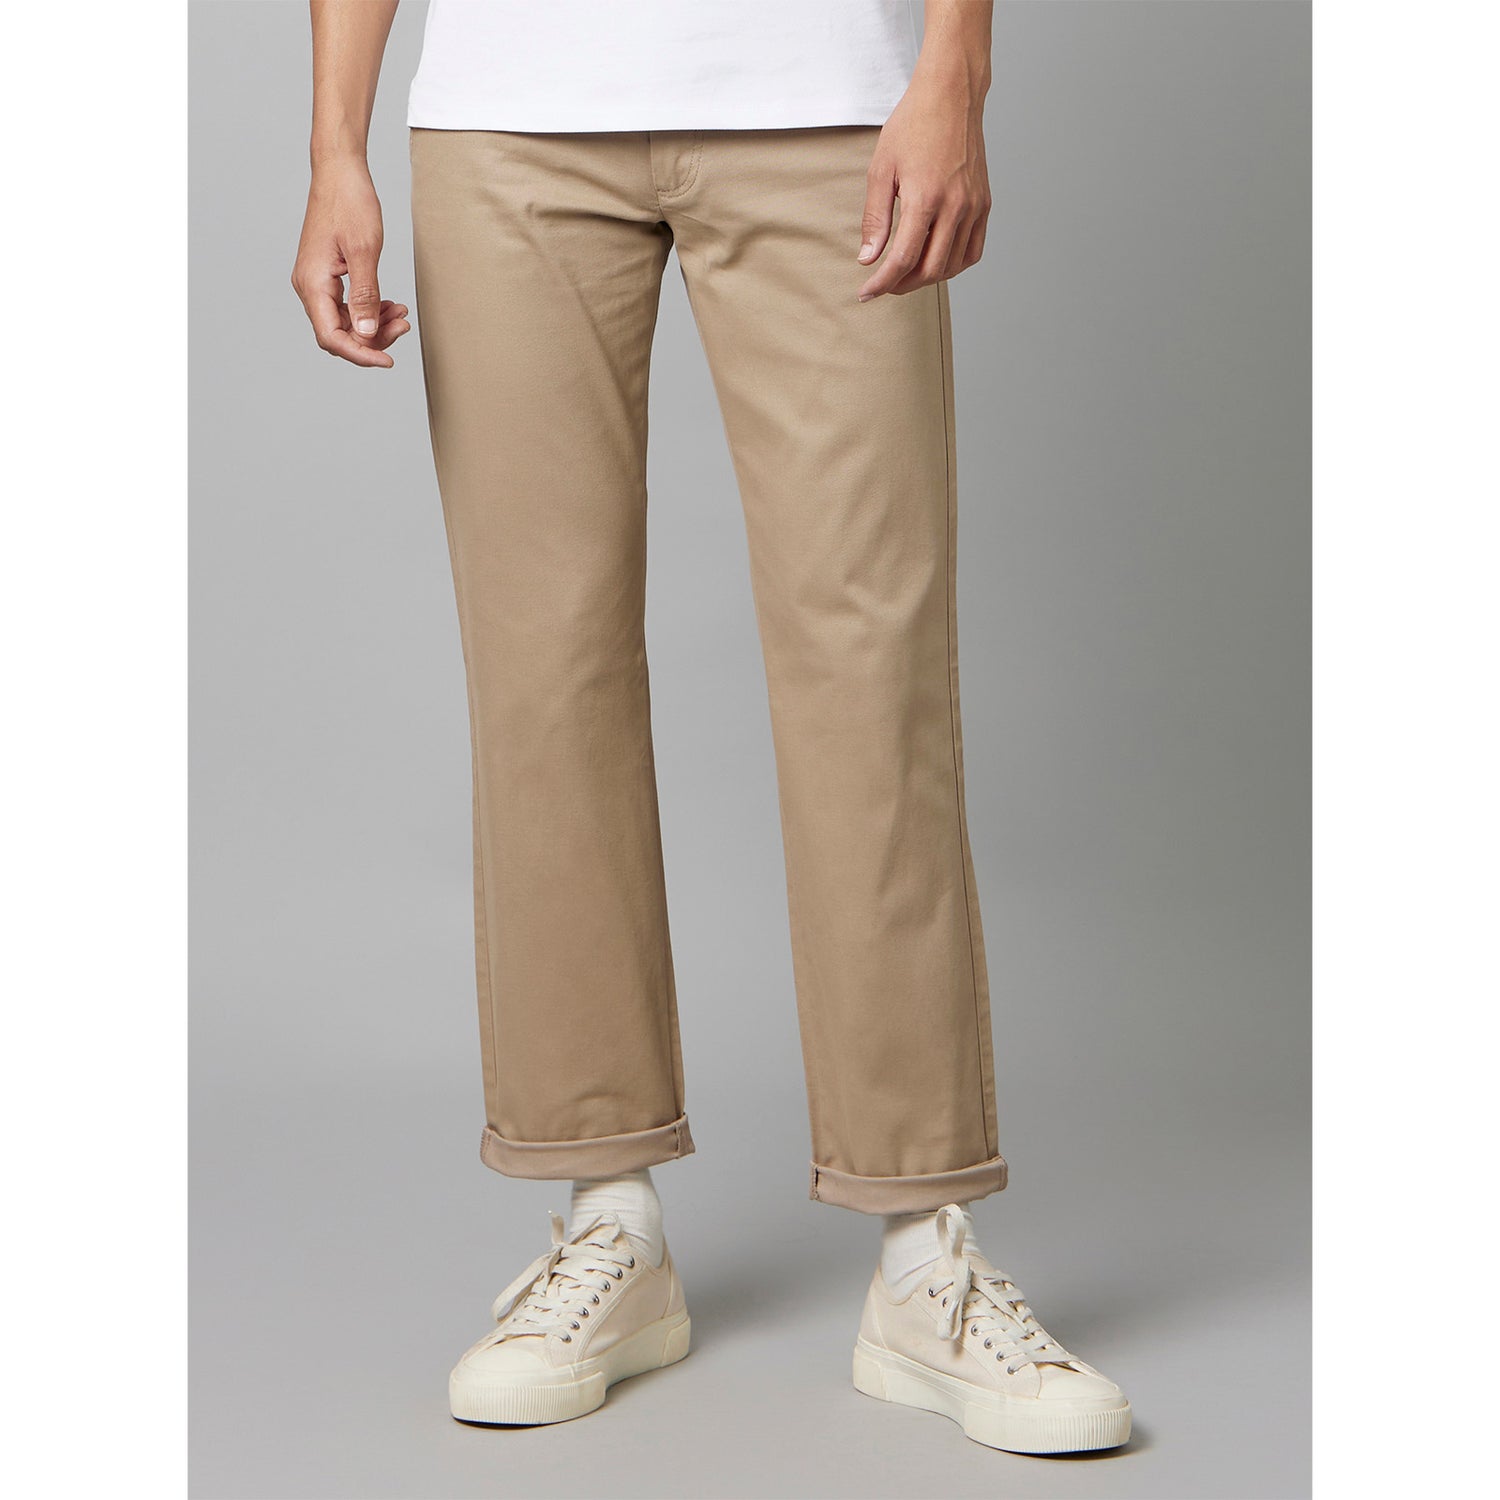 Beige Regular Fit Cotton Chinos Trousers (TOHENRI)